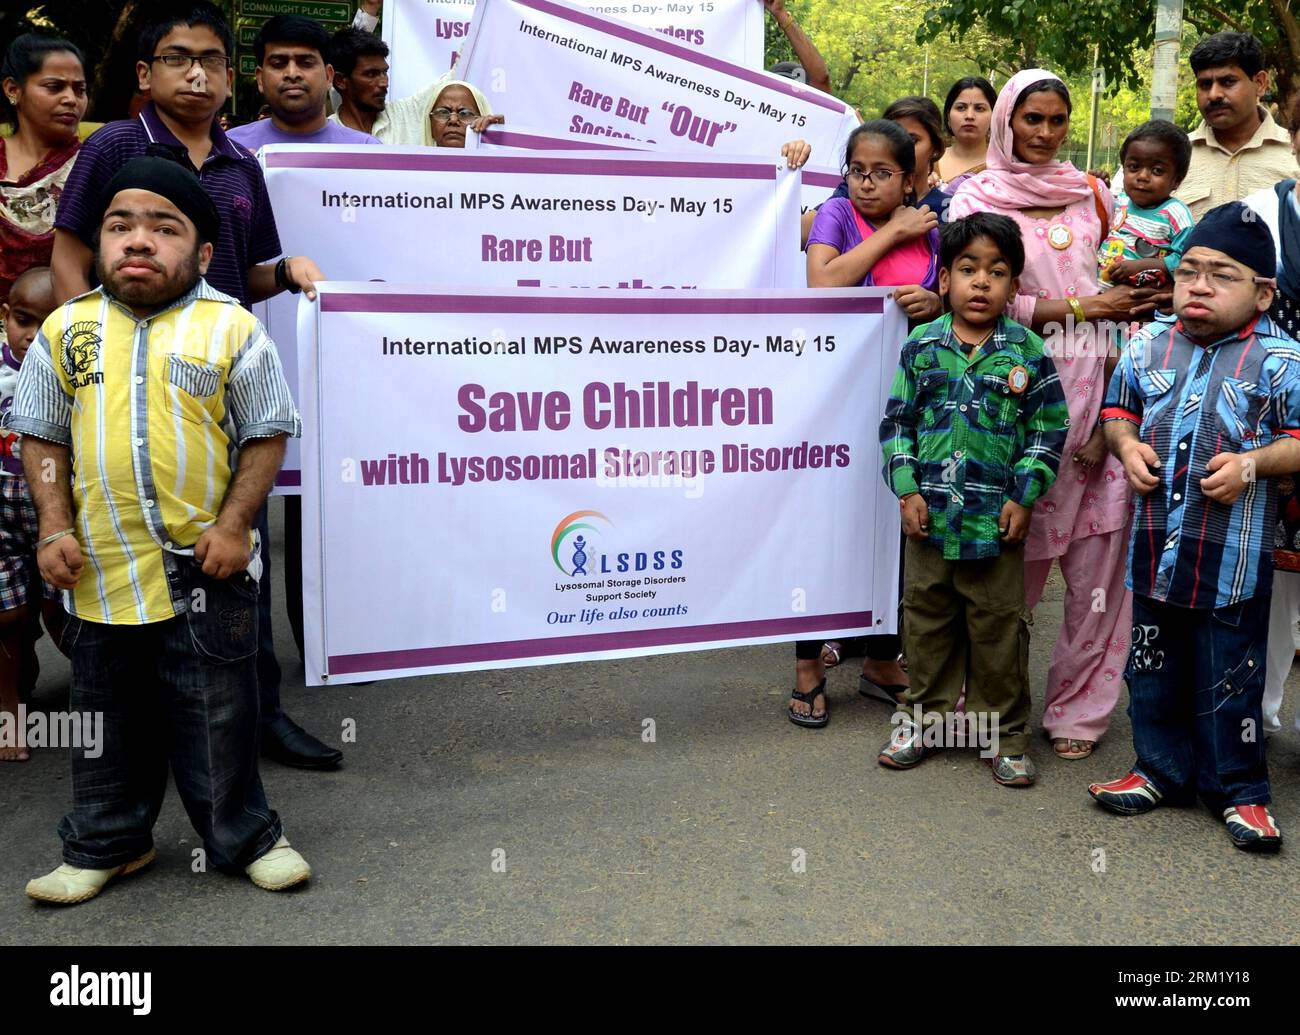 Bildnummer: 59648511  Datum: 15.05.2013  Copyright: imago/Xinhua (130515) -- NEW DELHI, May 15, 2013 (Xinhua) -- Patients of Mucopolysaccharidosis (MPS) attend a rally on International MPS Awareness Day in New Delhi, capital of India, on May 15, 2013. MPS disease results from defects in lysosomal function of the cells. (Xinhua/Partha Sarkar) (syq) INDIA-NEW DELHI-RALLY-MPS PUBLICATIONxNOTxINxCHN Politik Protest Demo Behinderung xas x0x 2013 quer premiumd      59648511 Date 15 05 2013 Copyright Imago XINHUA  New Delhi May 15 2013 XINHUA Patients of  MPS attend a Rally ON International MPS Aware Stock Photo